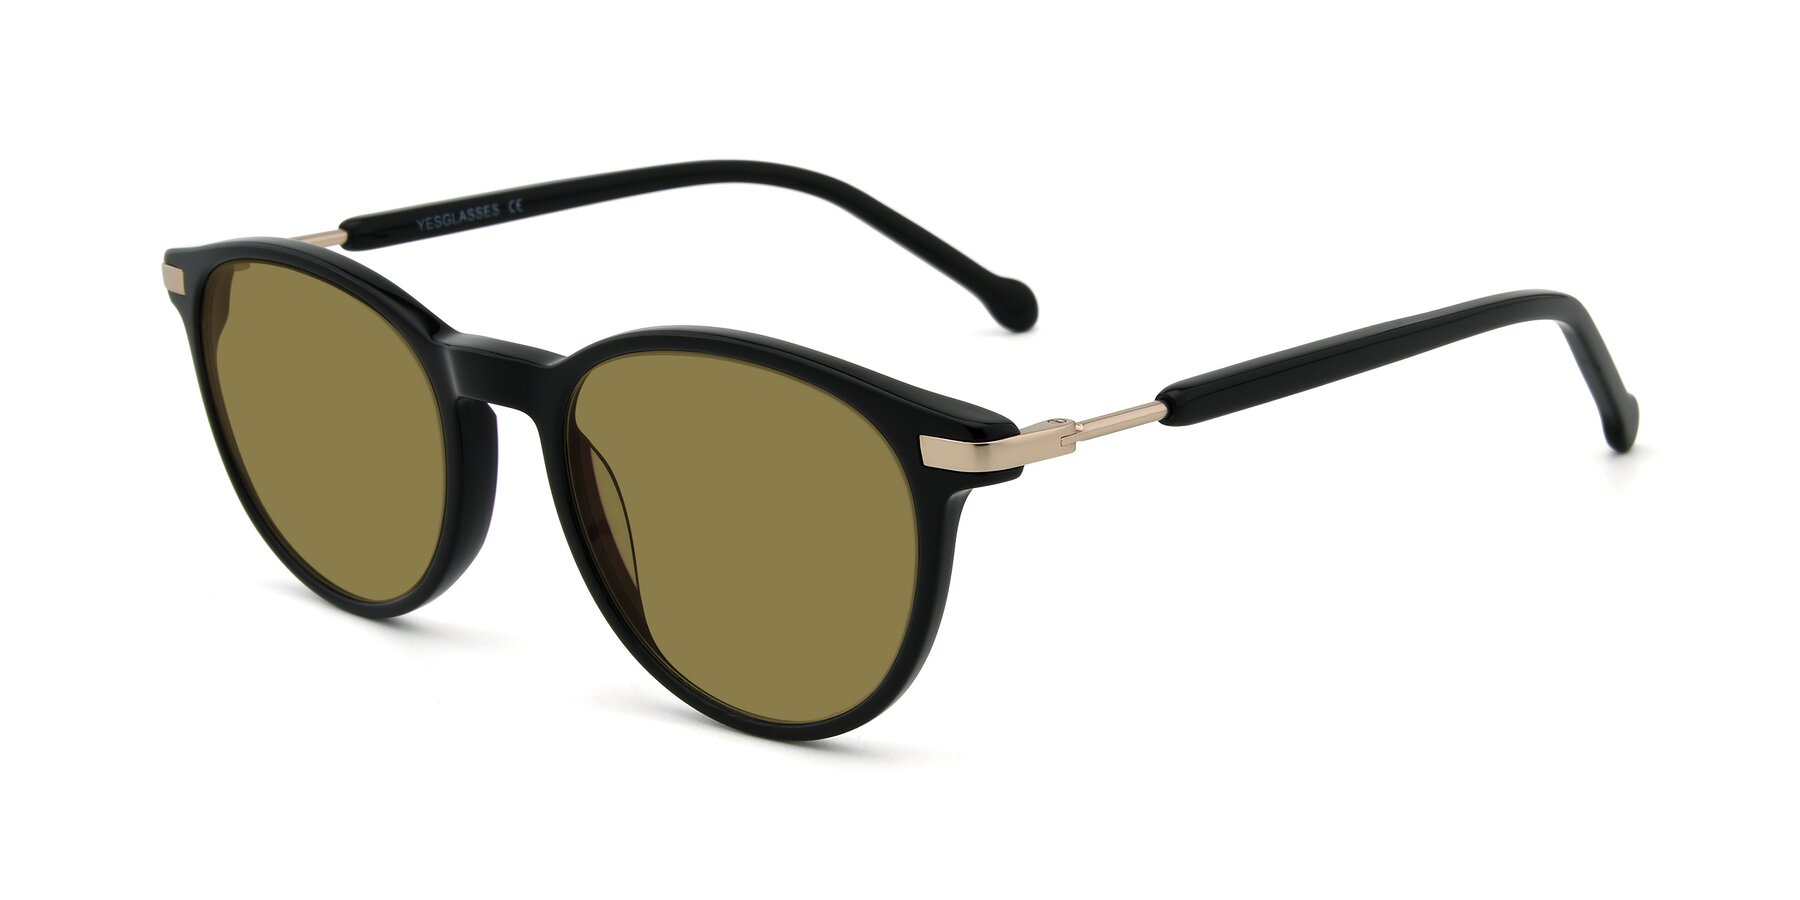 Angle of 17429 in Black with Brown Polarized Lenses